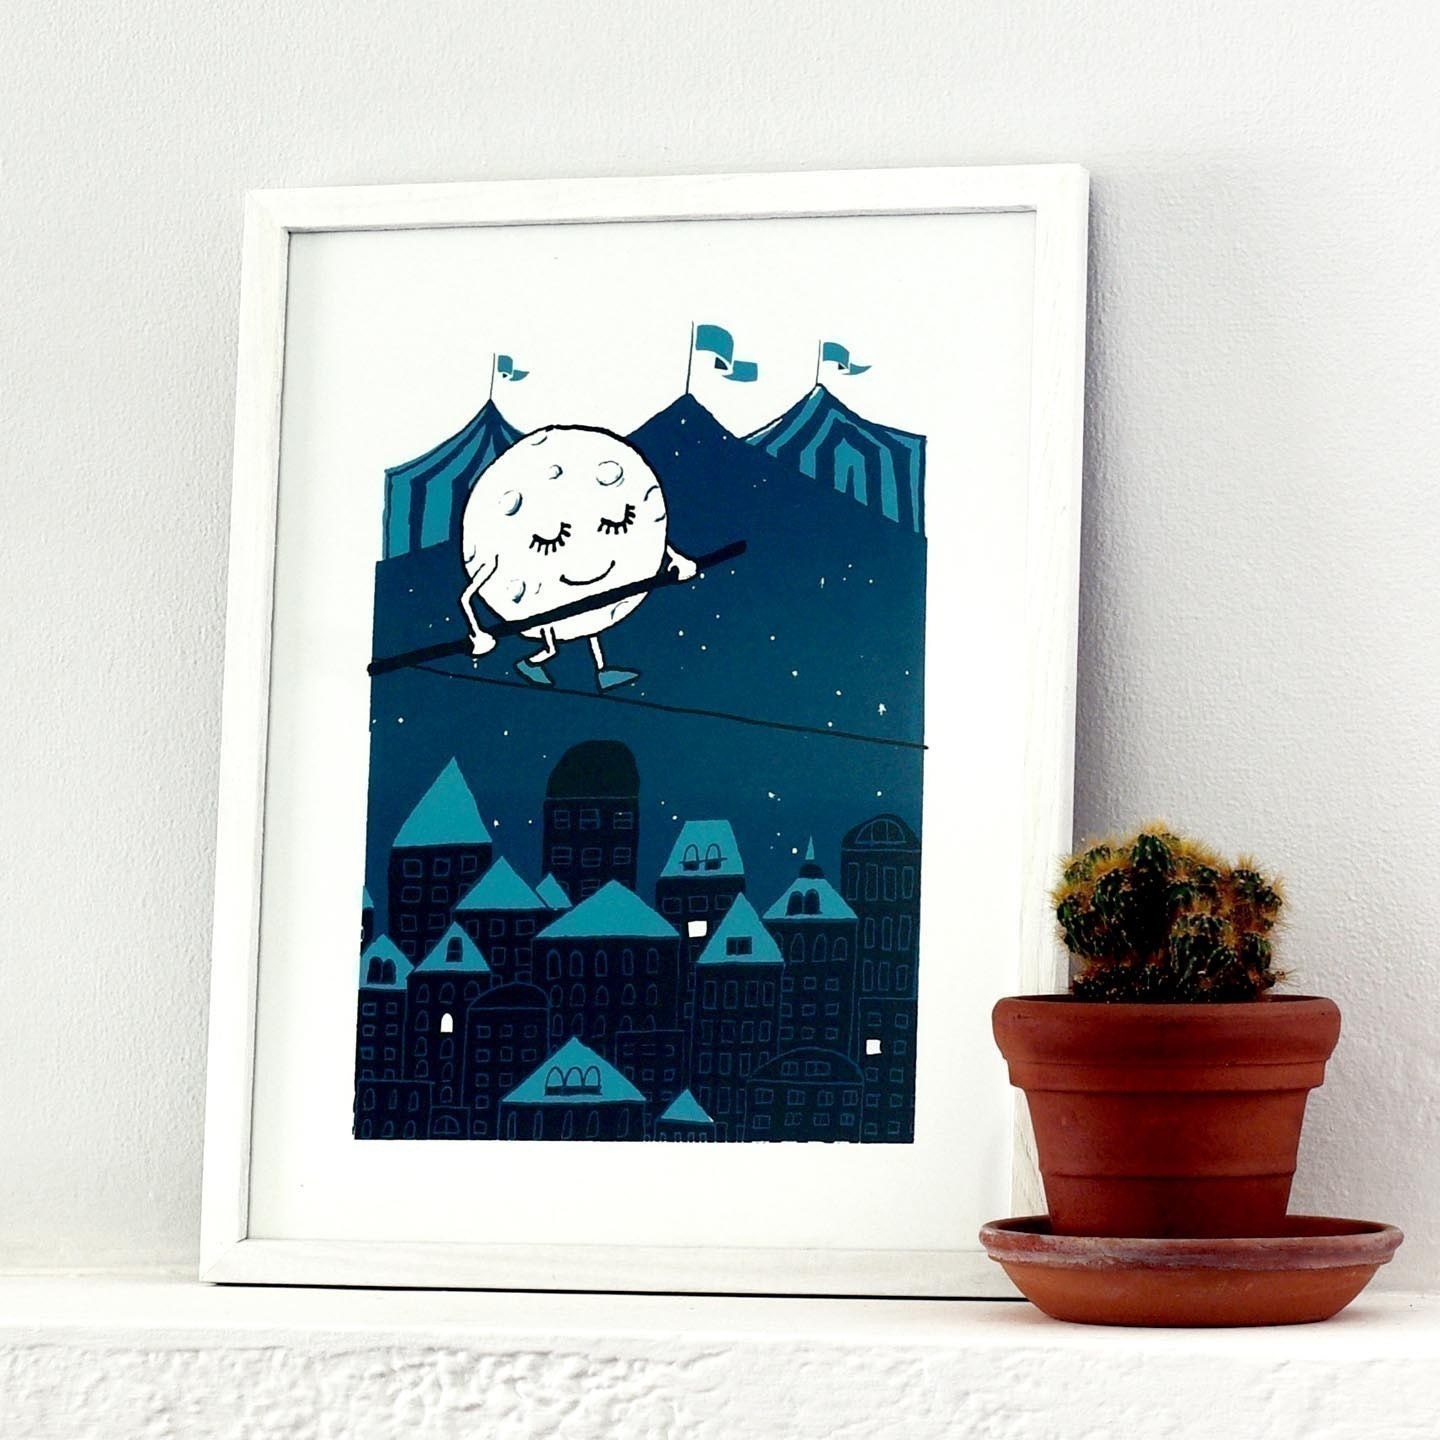 ON SALE - silk screen printed poster - Moon Walks A Tightrope